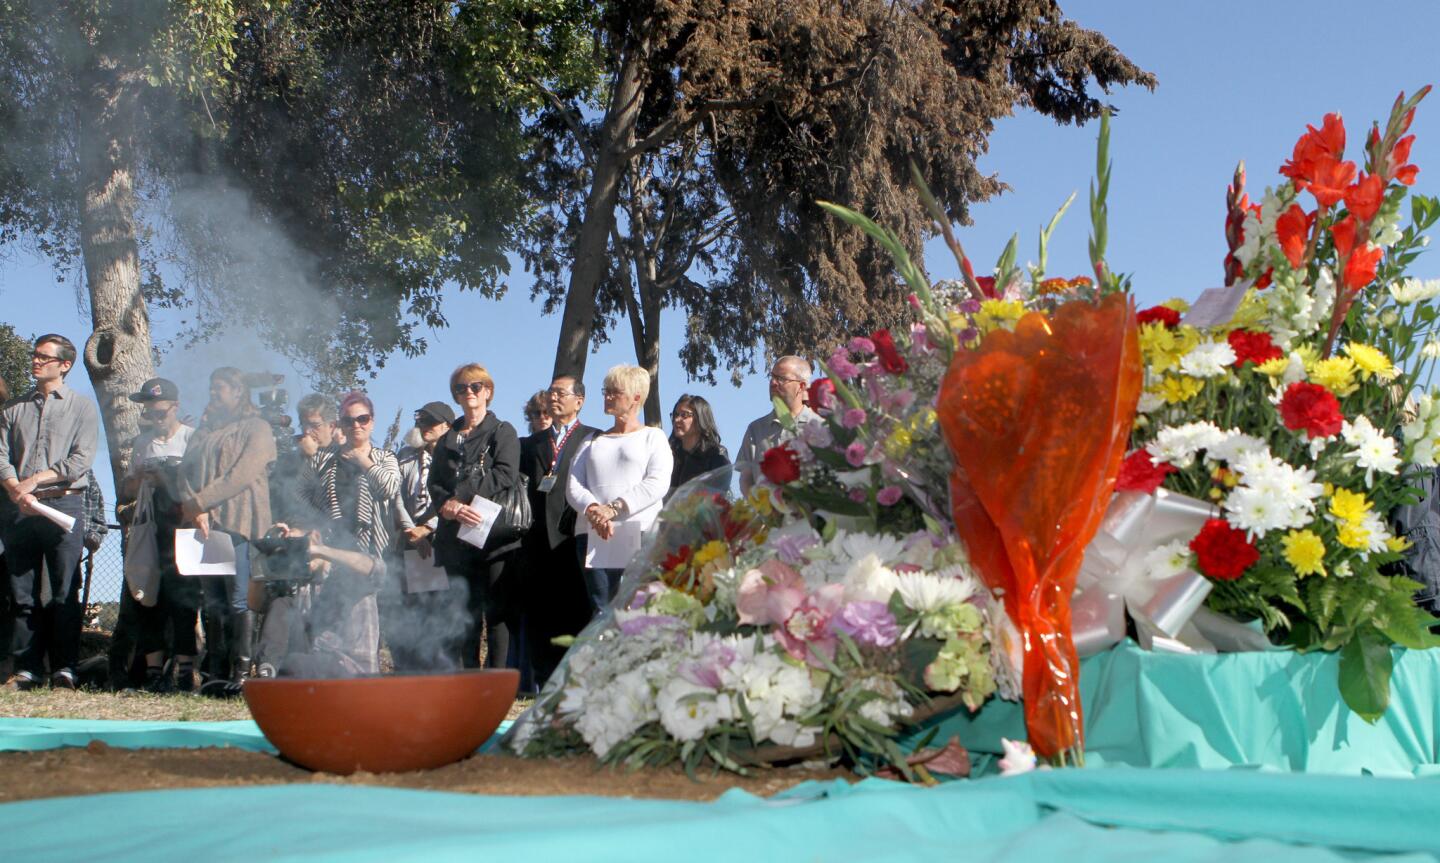 Photo Gallery: Los Angeles County Annual Burial of the Unclaimed Dead nondenominational, interfaith ceremony held at L.A. County Cemetery in Boyle Heights